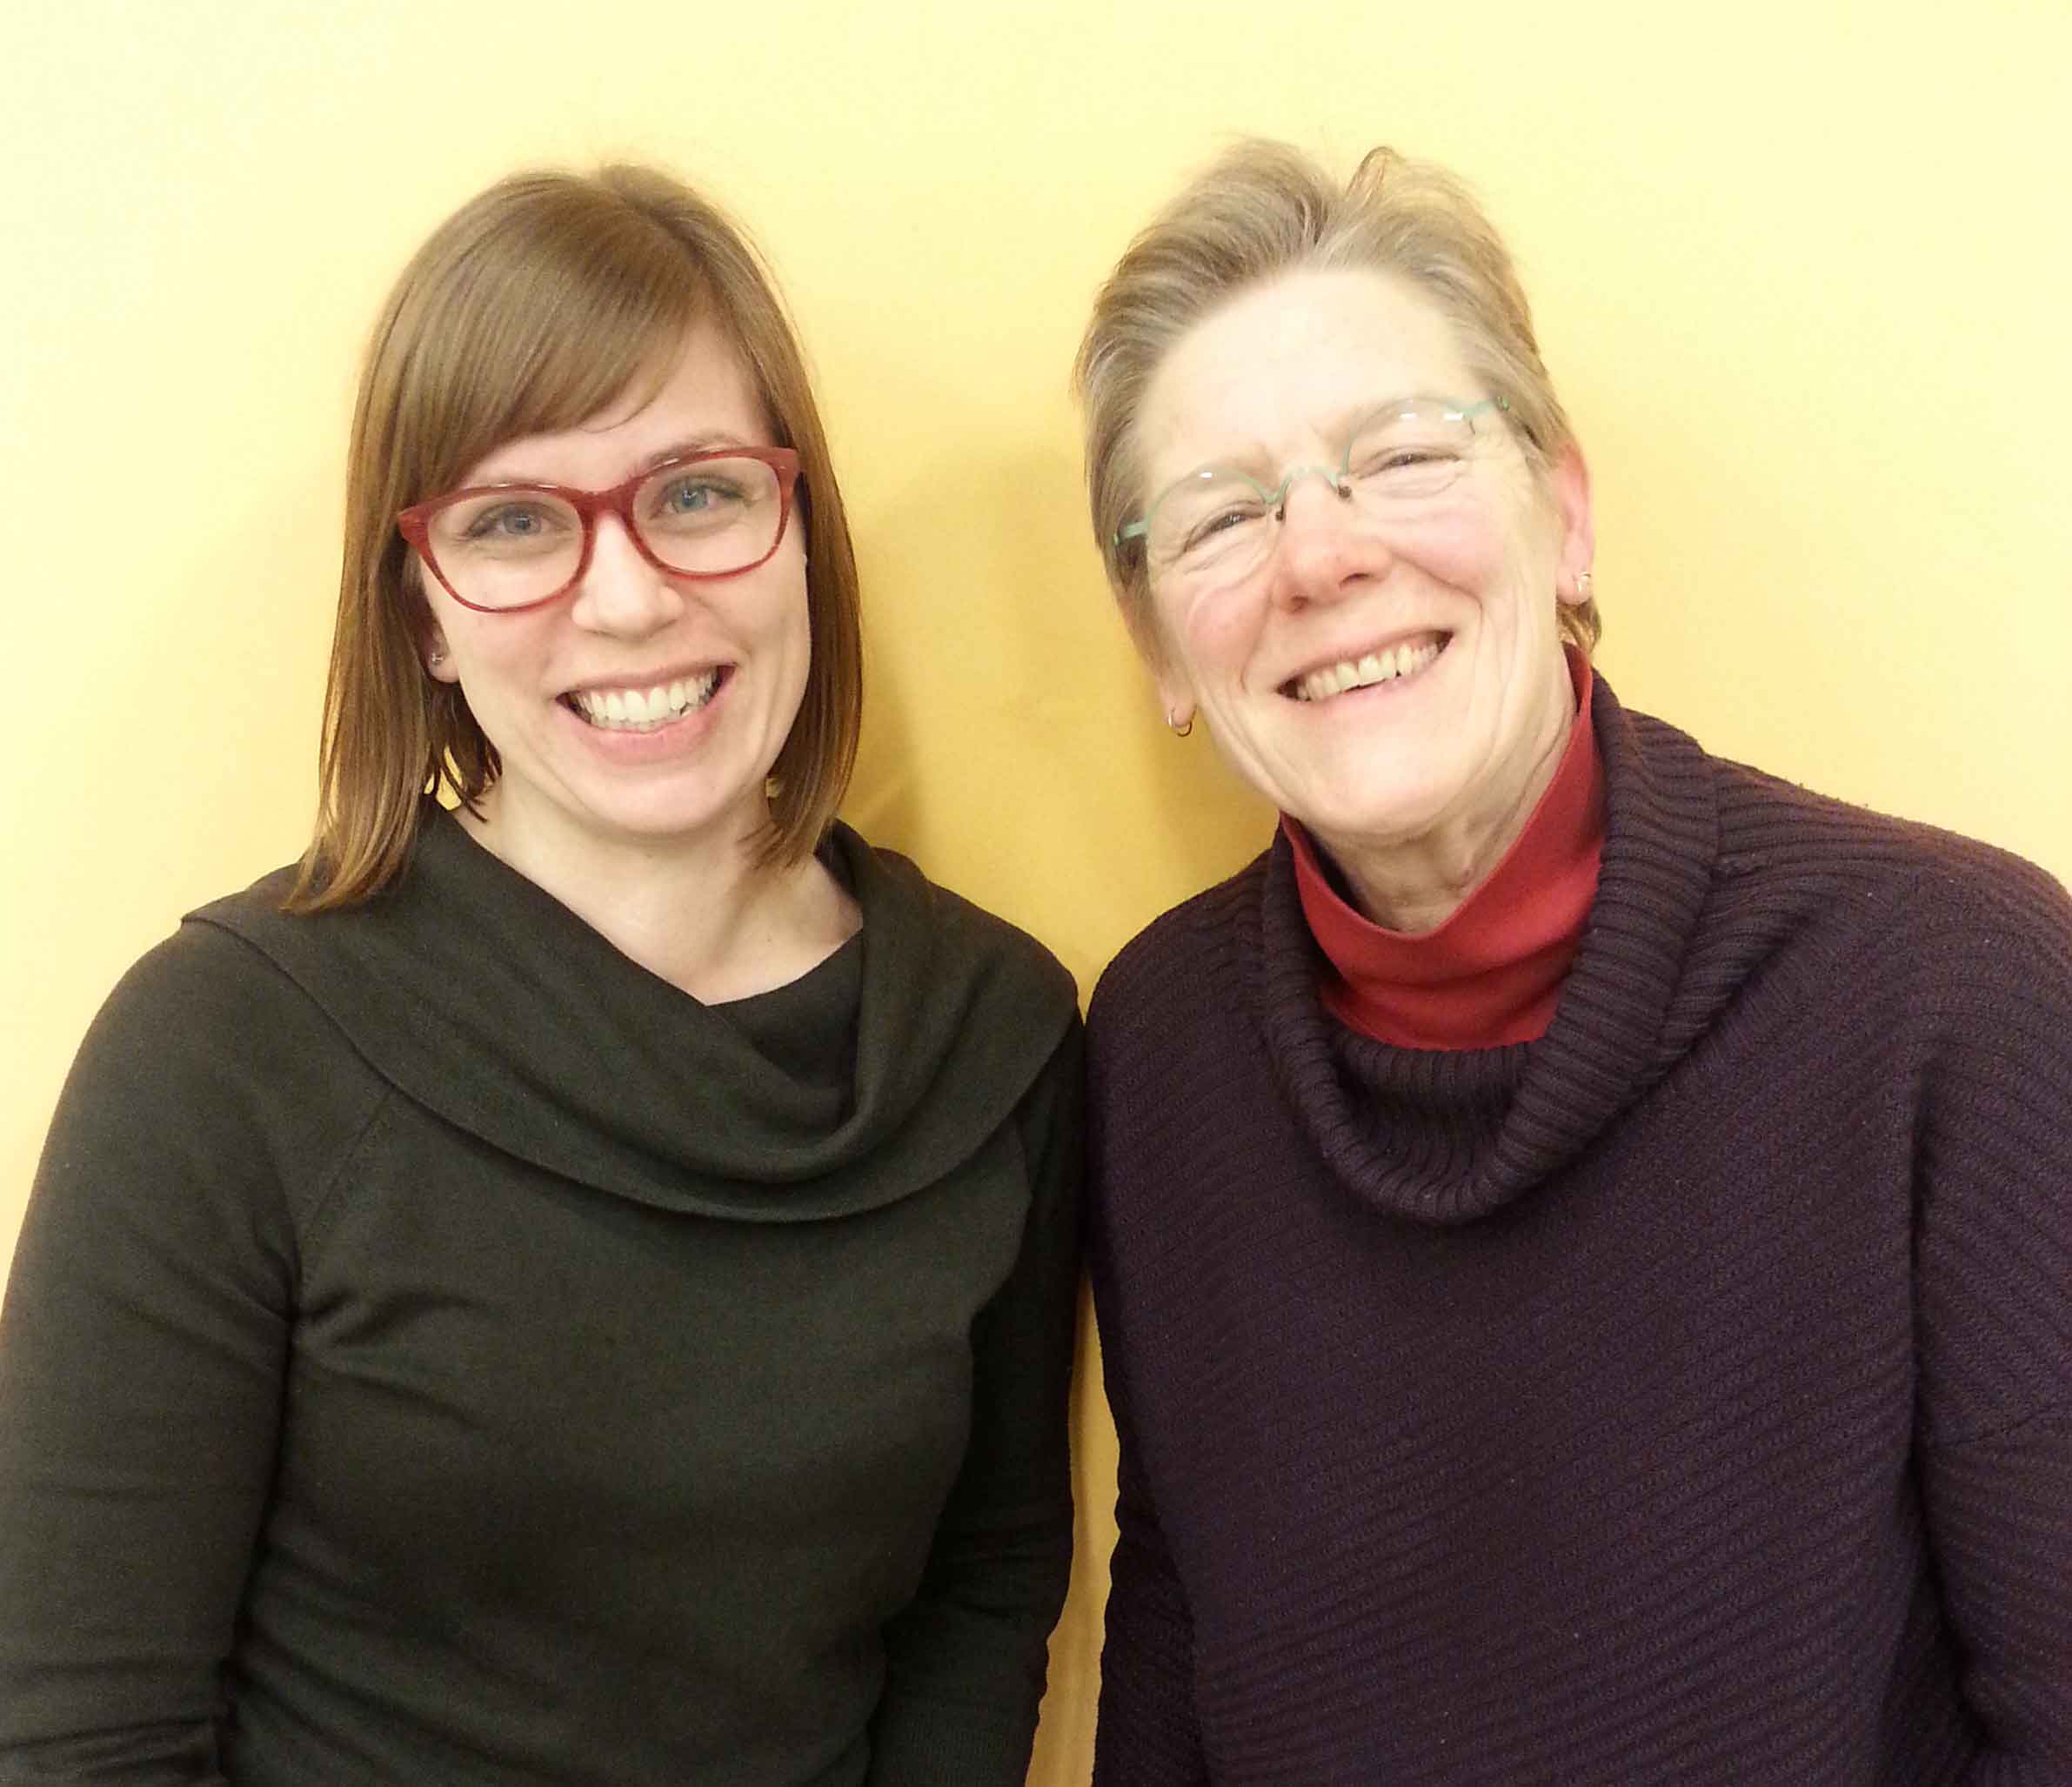 L to R: Elenor Wilson and Mary Barringer, January 2014